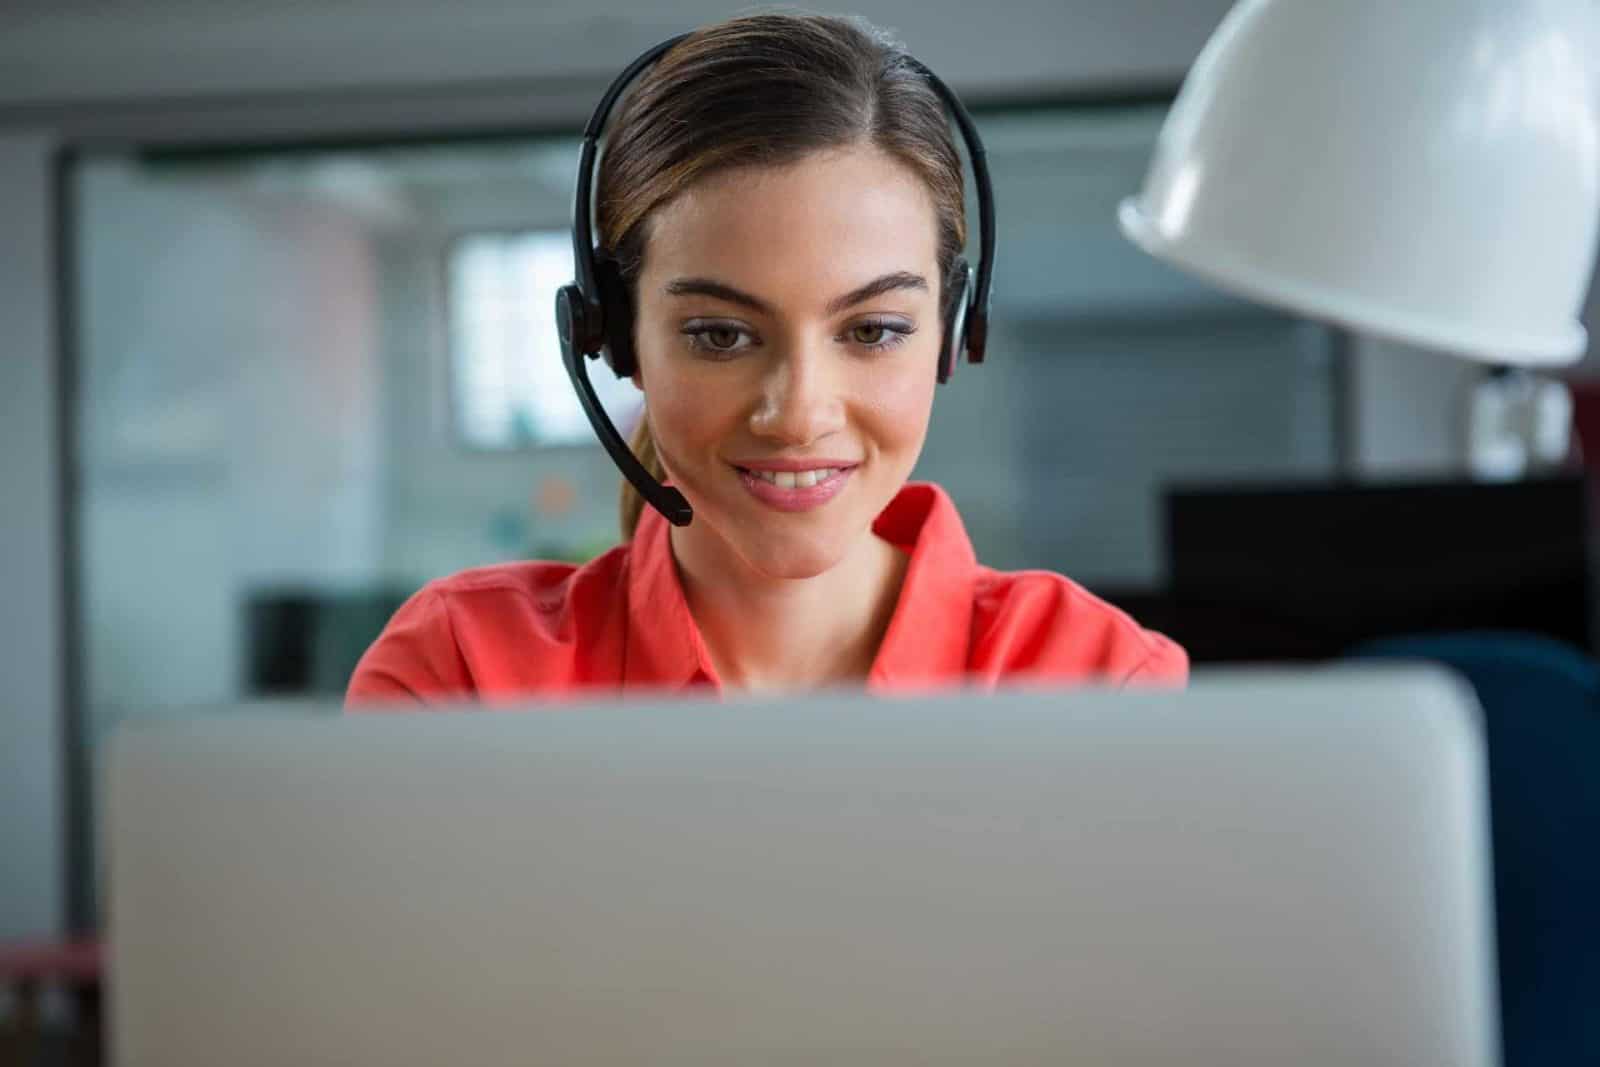 A Virtual Receptionist Working Remotely
